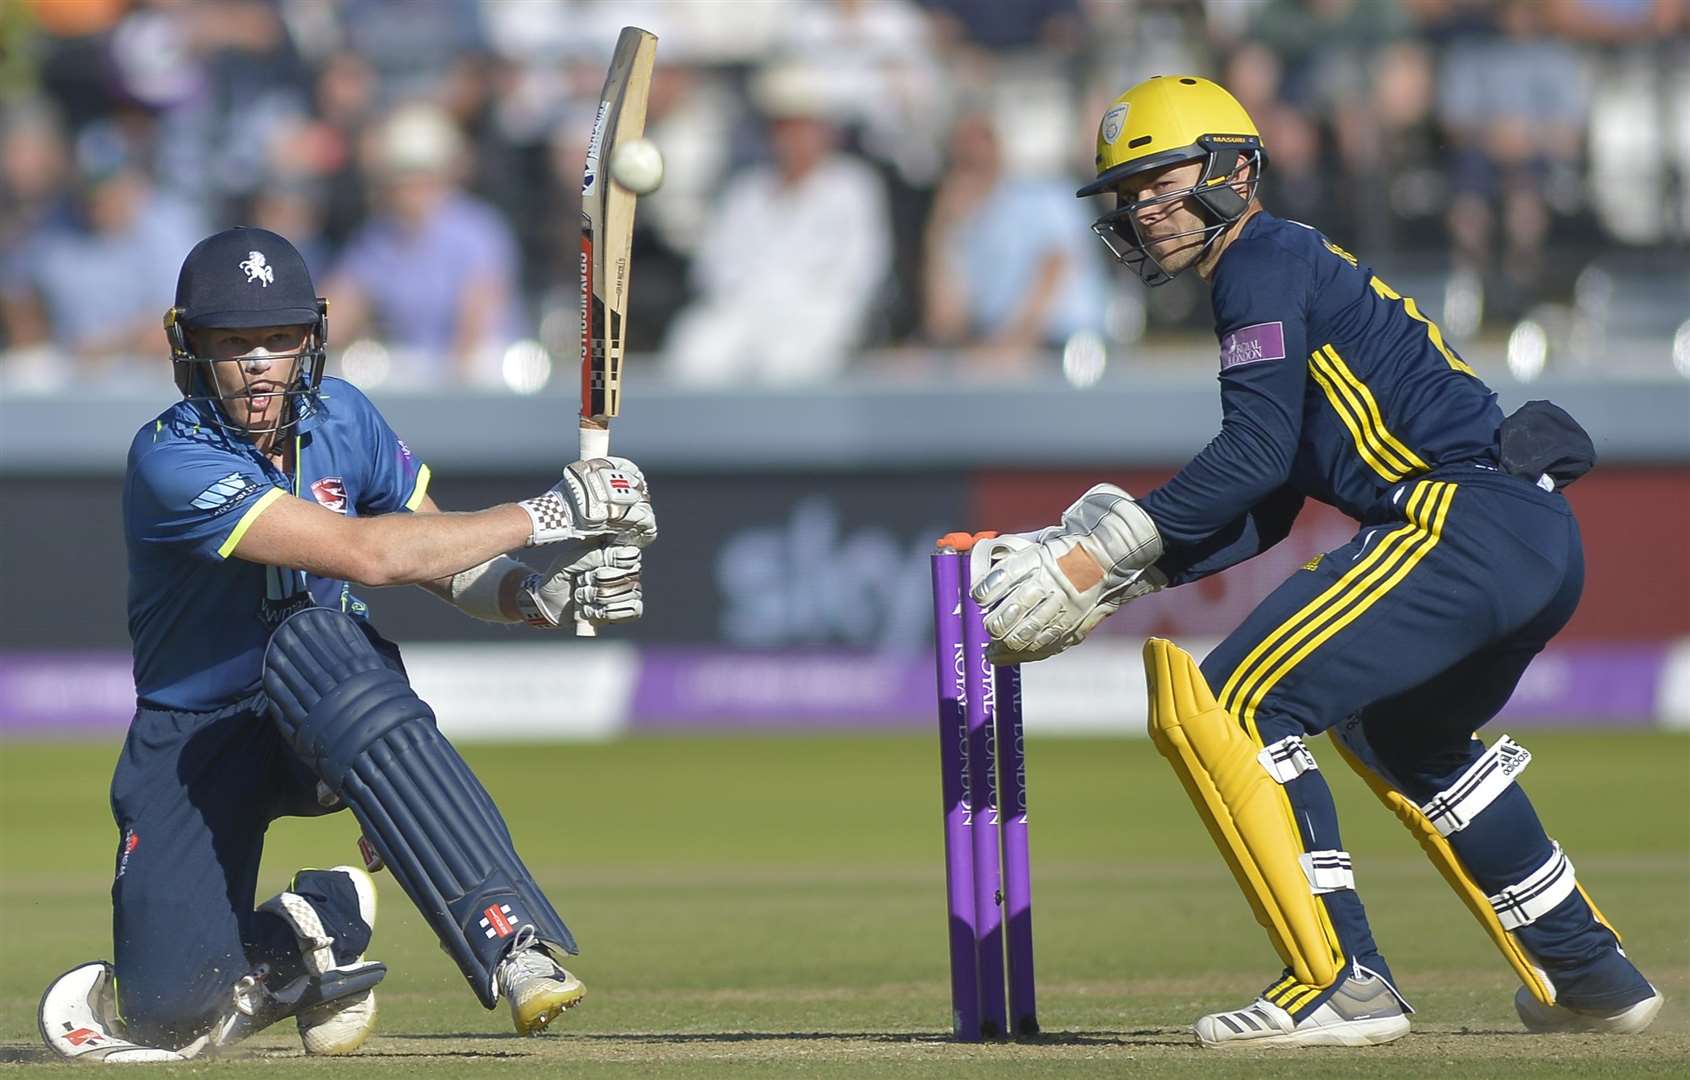 Sam Billings sweeps behind square Picture: Ady Kerry